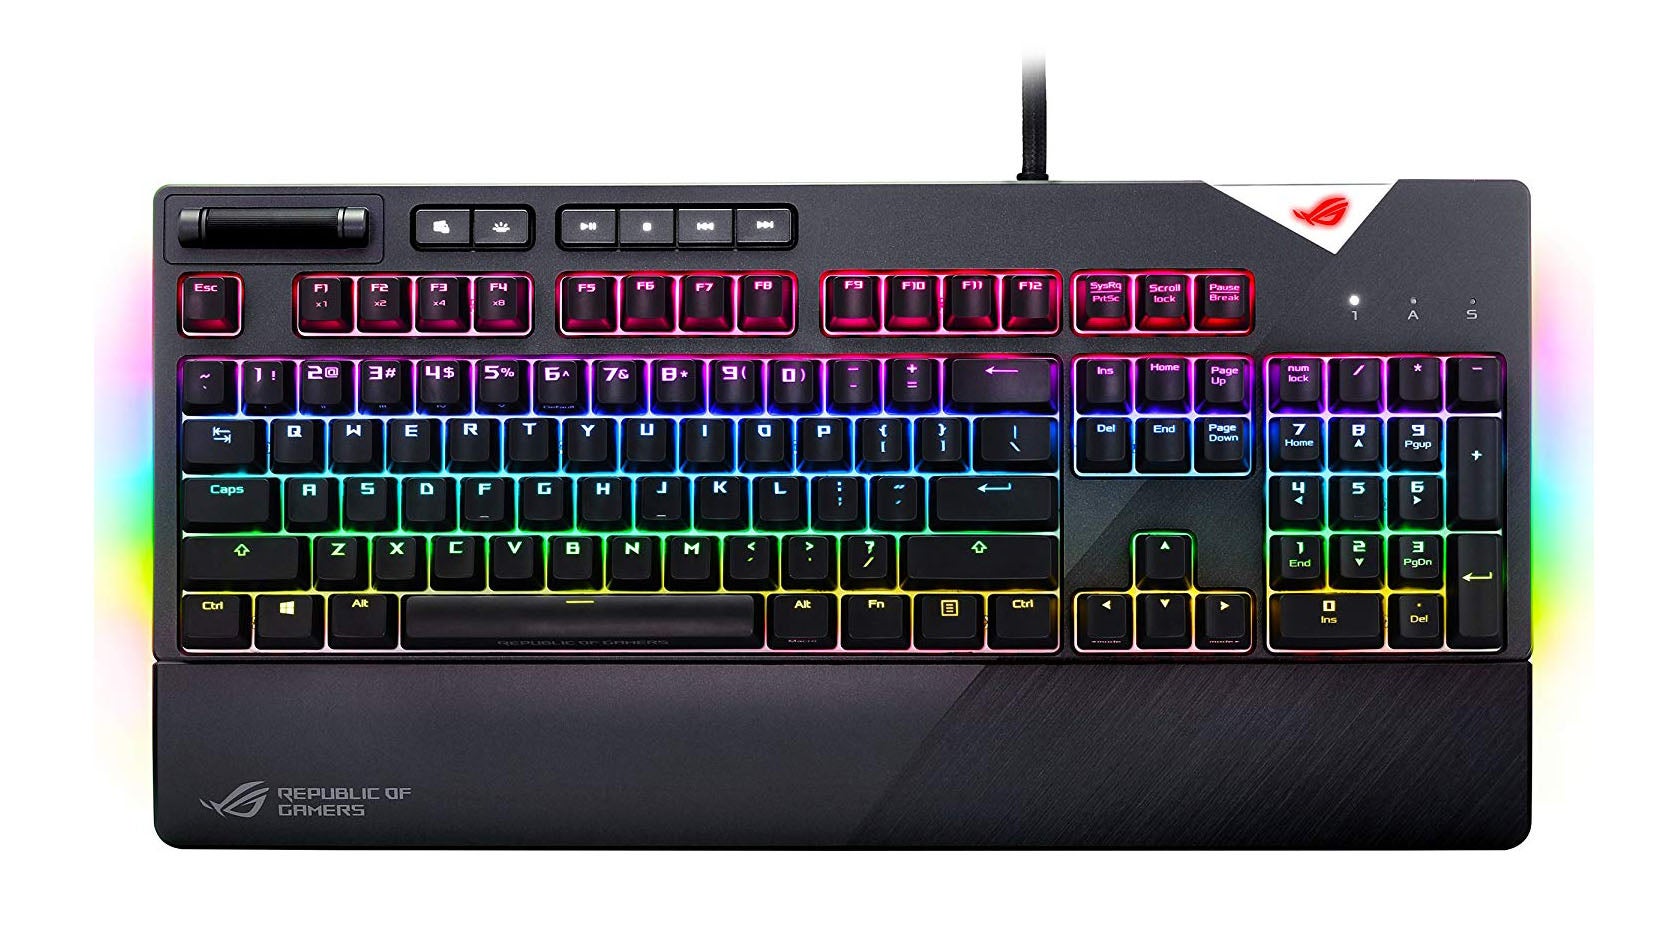 How To Change ASUS ROG Gaming Laptop Keyboard Color